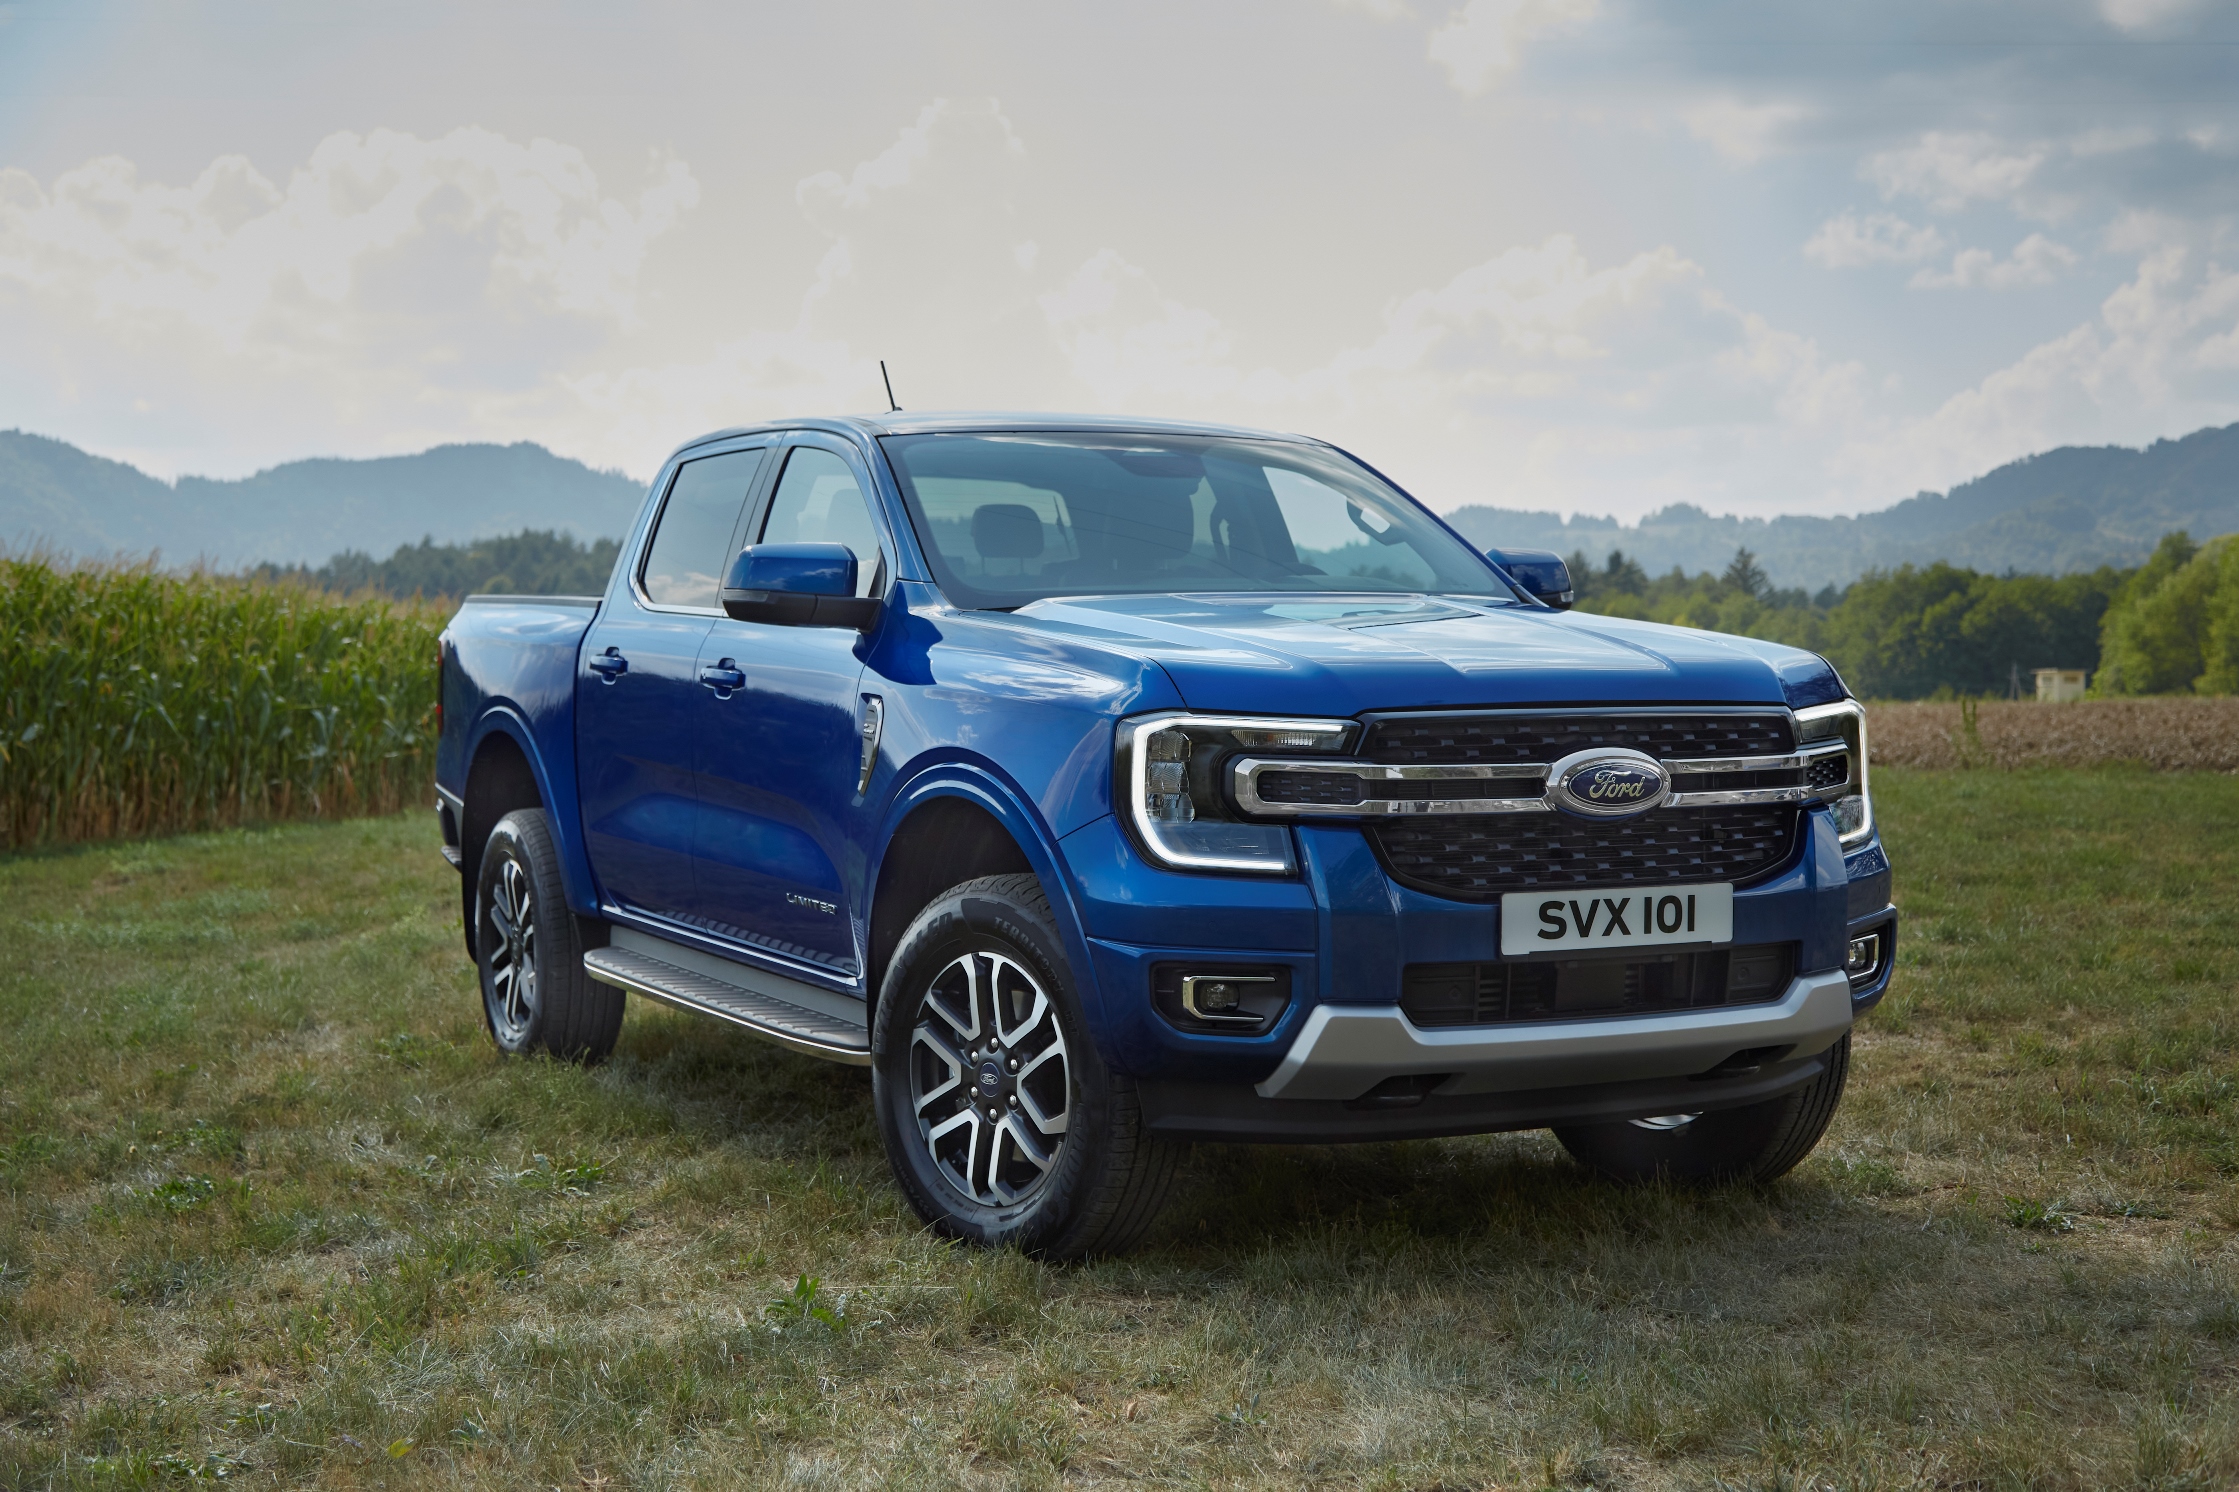 https://s1.cdn.autoevolution.com/images/news/2023-ford-ranger-gets-priced-in-europe-and-the-uk-it-s-more-expensive-than-previous-model-197558_1.jpg